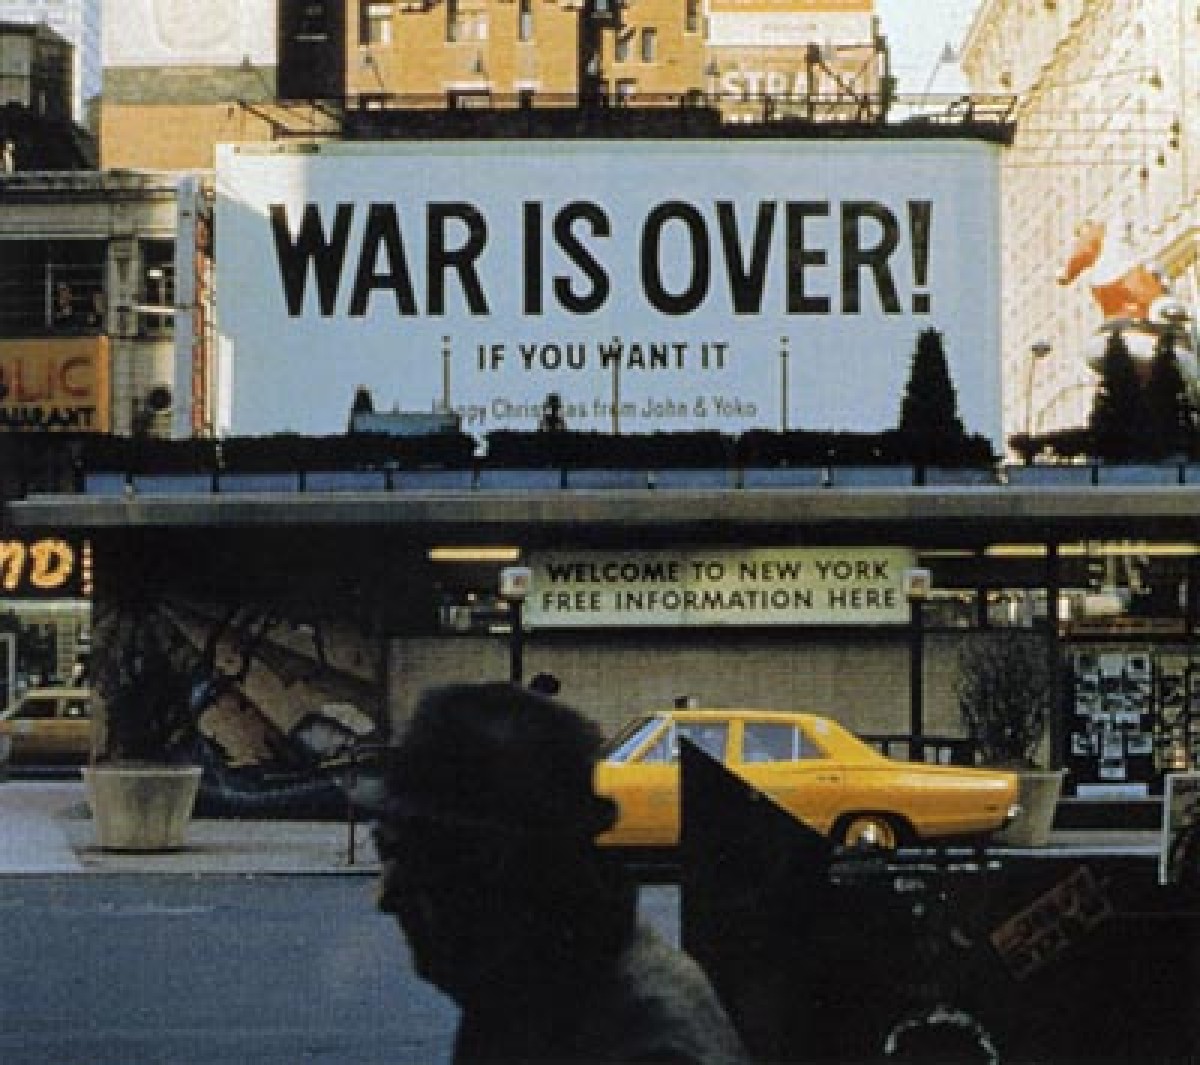 Ono and Lennon WAR IS OVER!, 1969